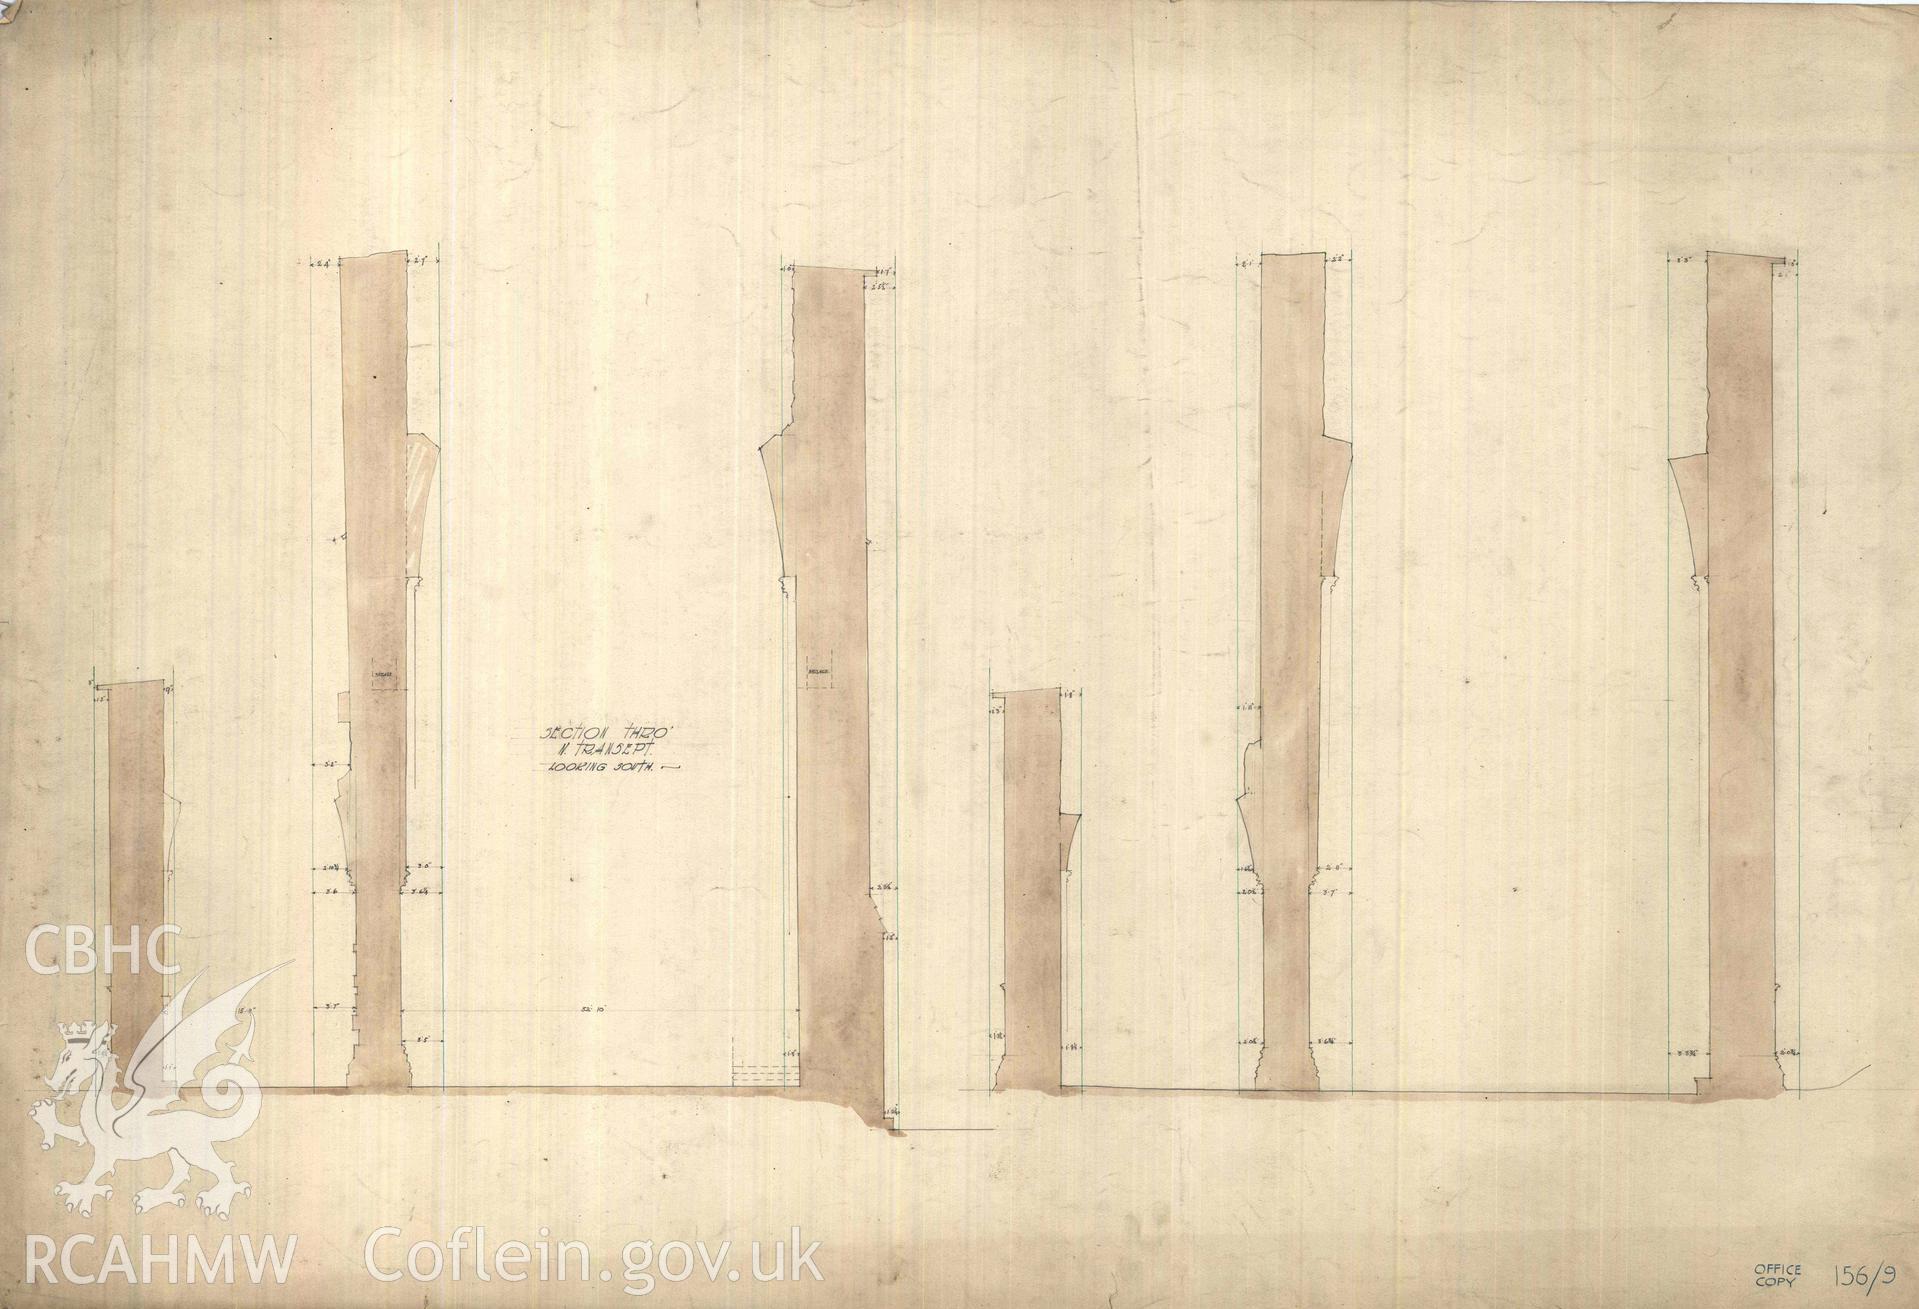 Cadw guardianship monument drawing of Tintern Abbey. N transept, section. Cadw ref. No. 156/9. Scale 1:48.